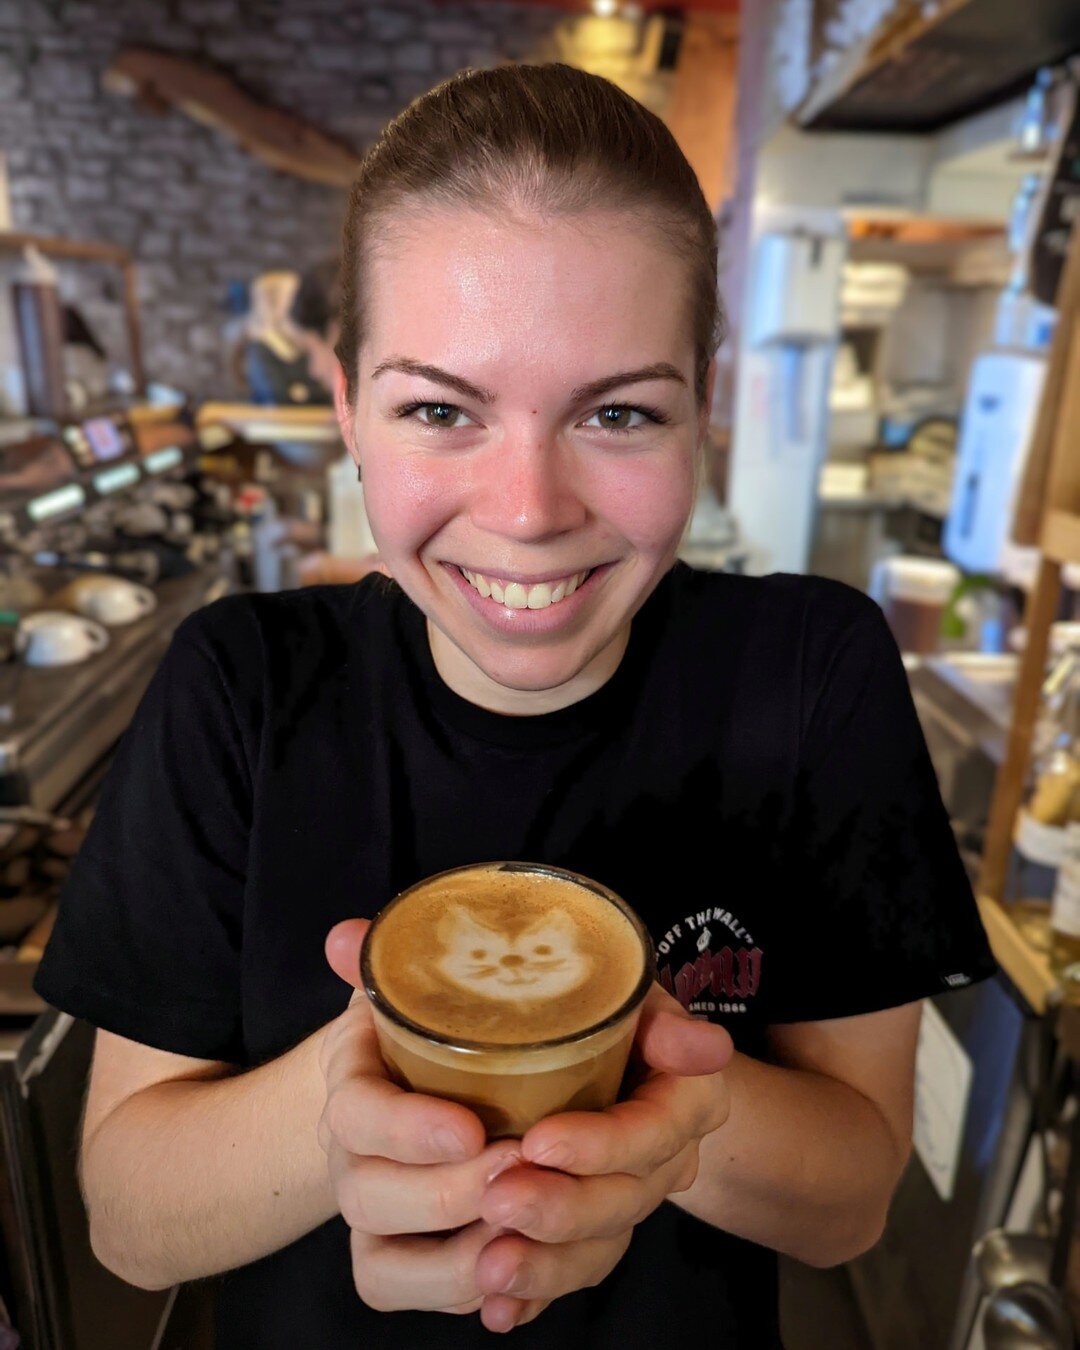 We can confirm no cats were harmed in the making of this coffee, just Lina's hands because I took too long to take photo, sorry Lina 😅
.
.
.
.
.
.
.
.
#Edinburgh #southbridge #coffee #cortado #cats #latteart #veganfriendly